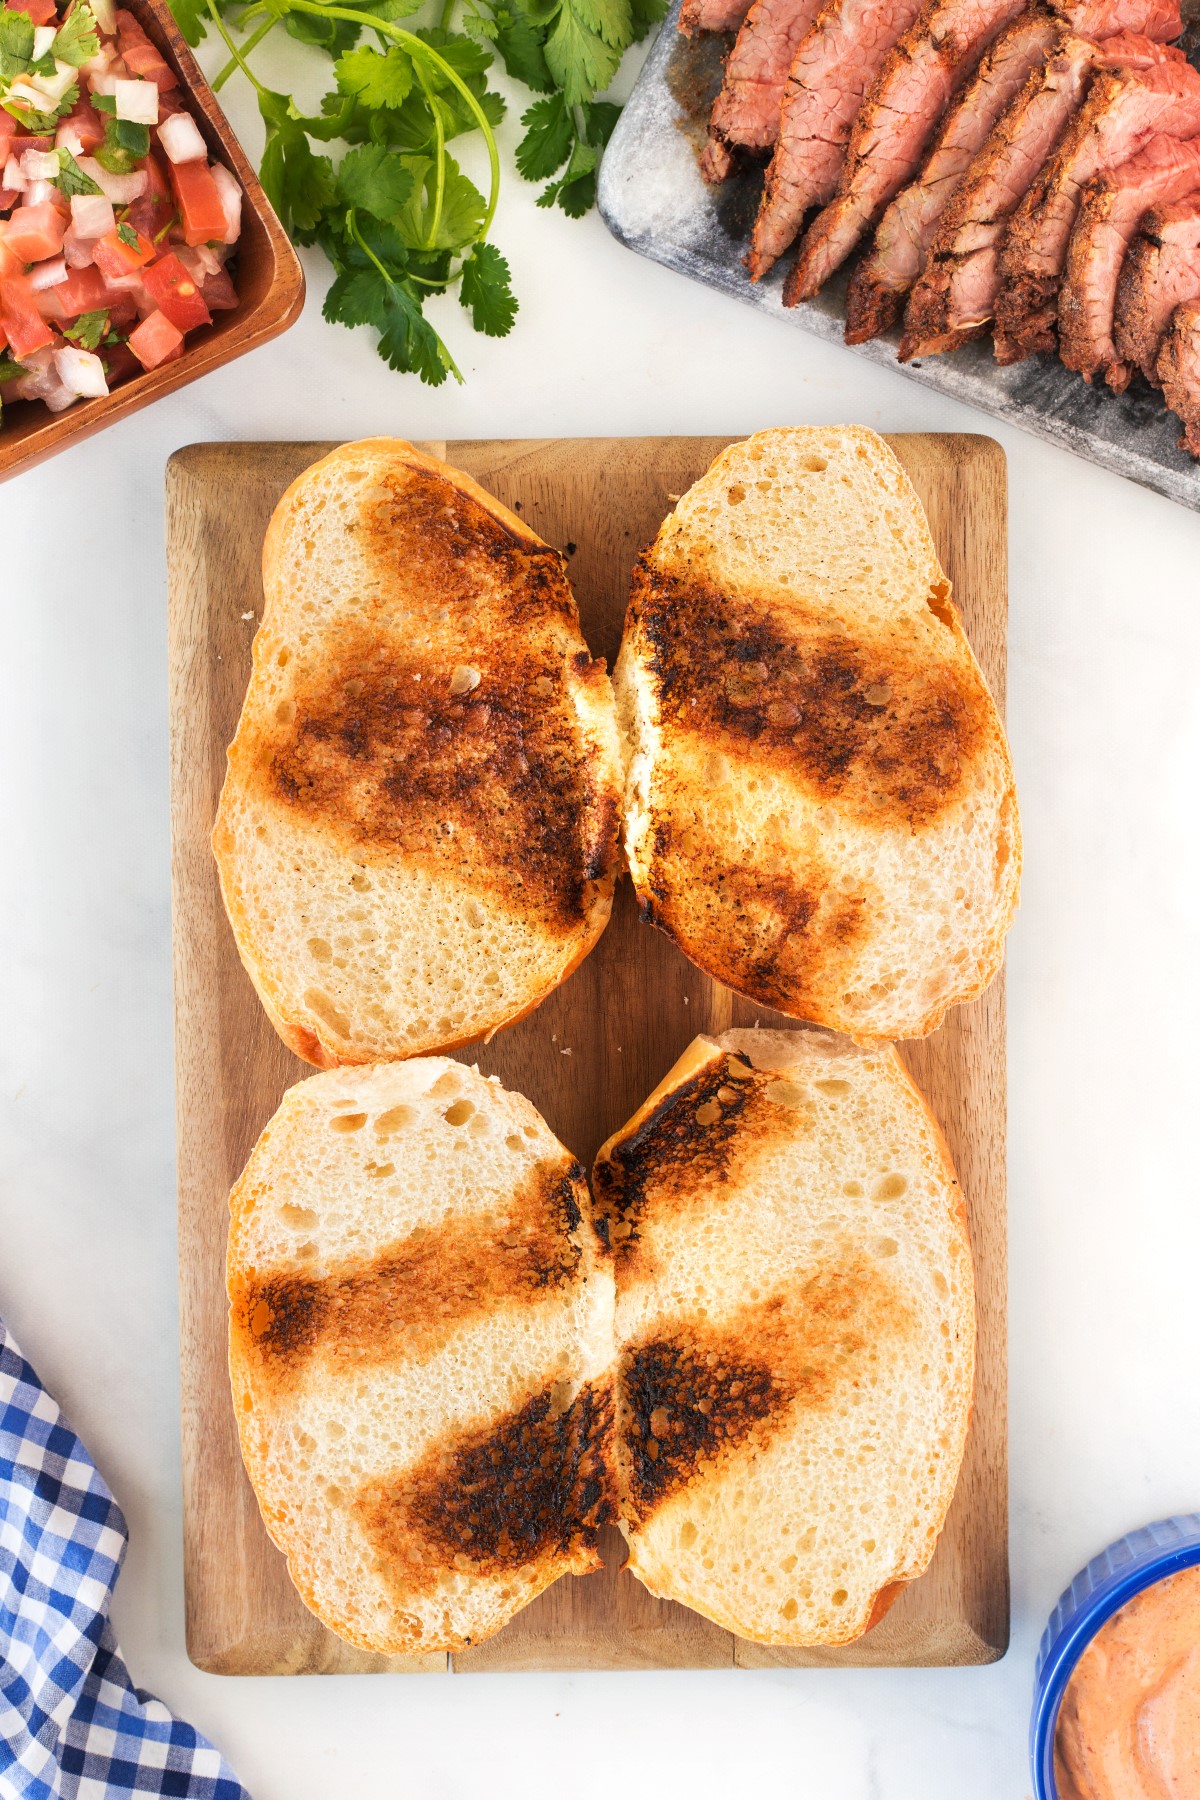 Toasted slices of bread for the grilled tri-tip steak sandwich.